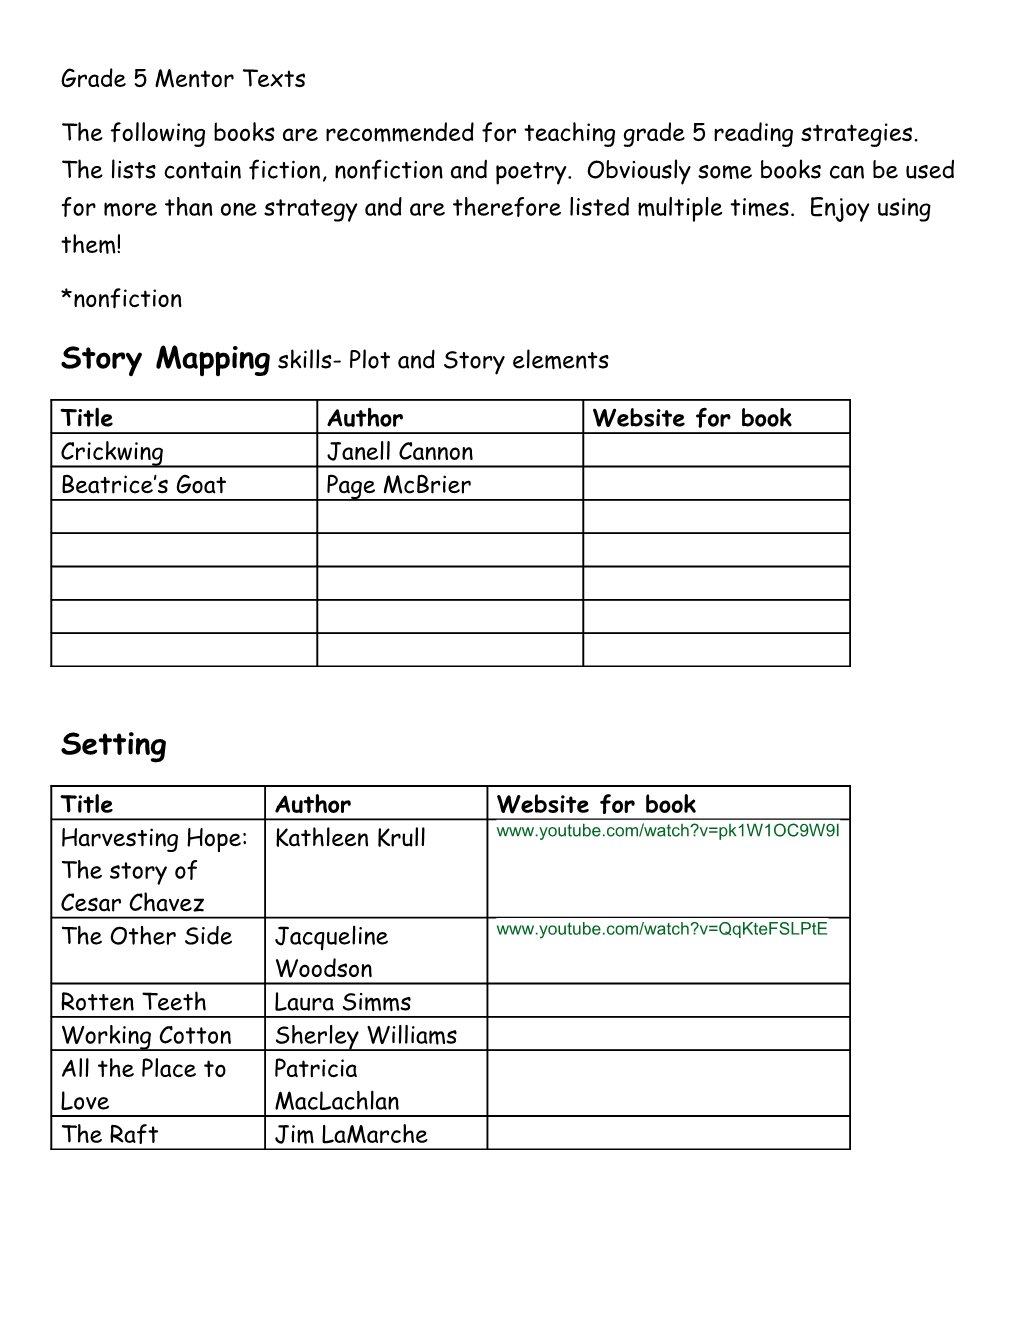 Story Mapping Skills- Plot and Story Elements